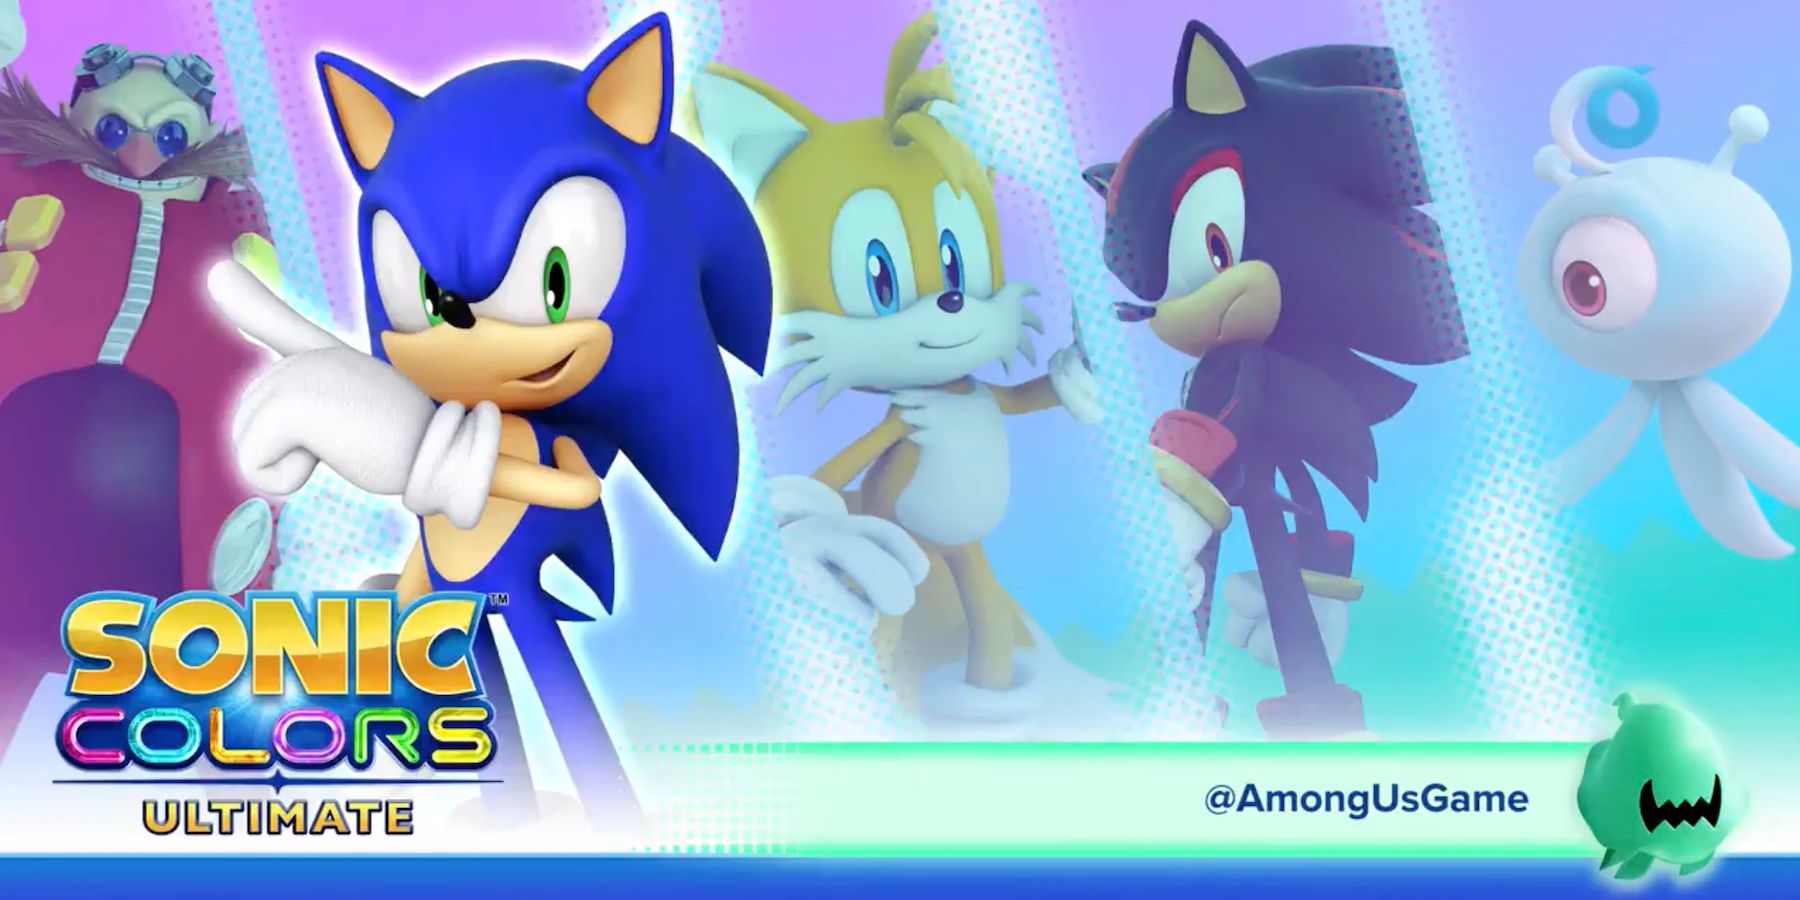 sonic colors ultimate among us questions egg man sonic tails shadow yacker